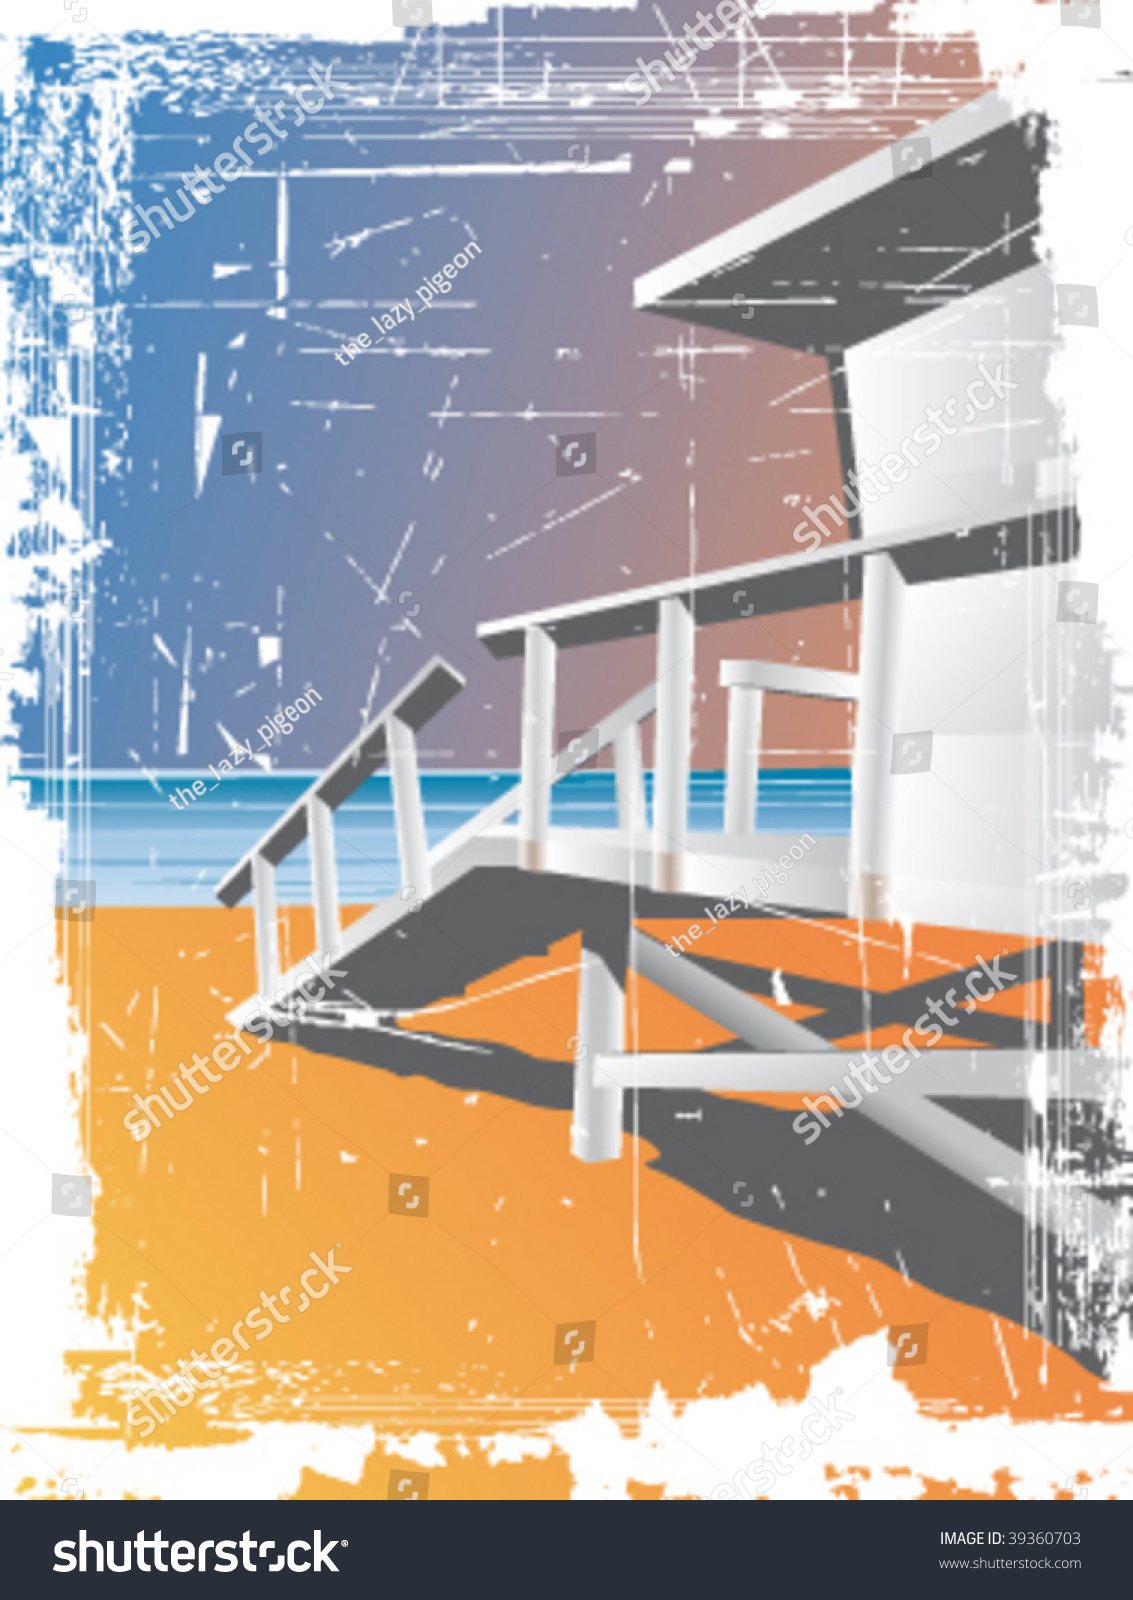 SVG of Lifeguard stand on the beach, grunge vector illustration svg